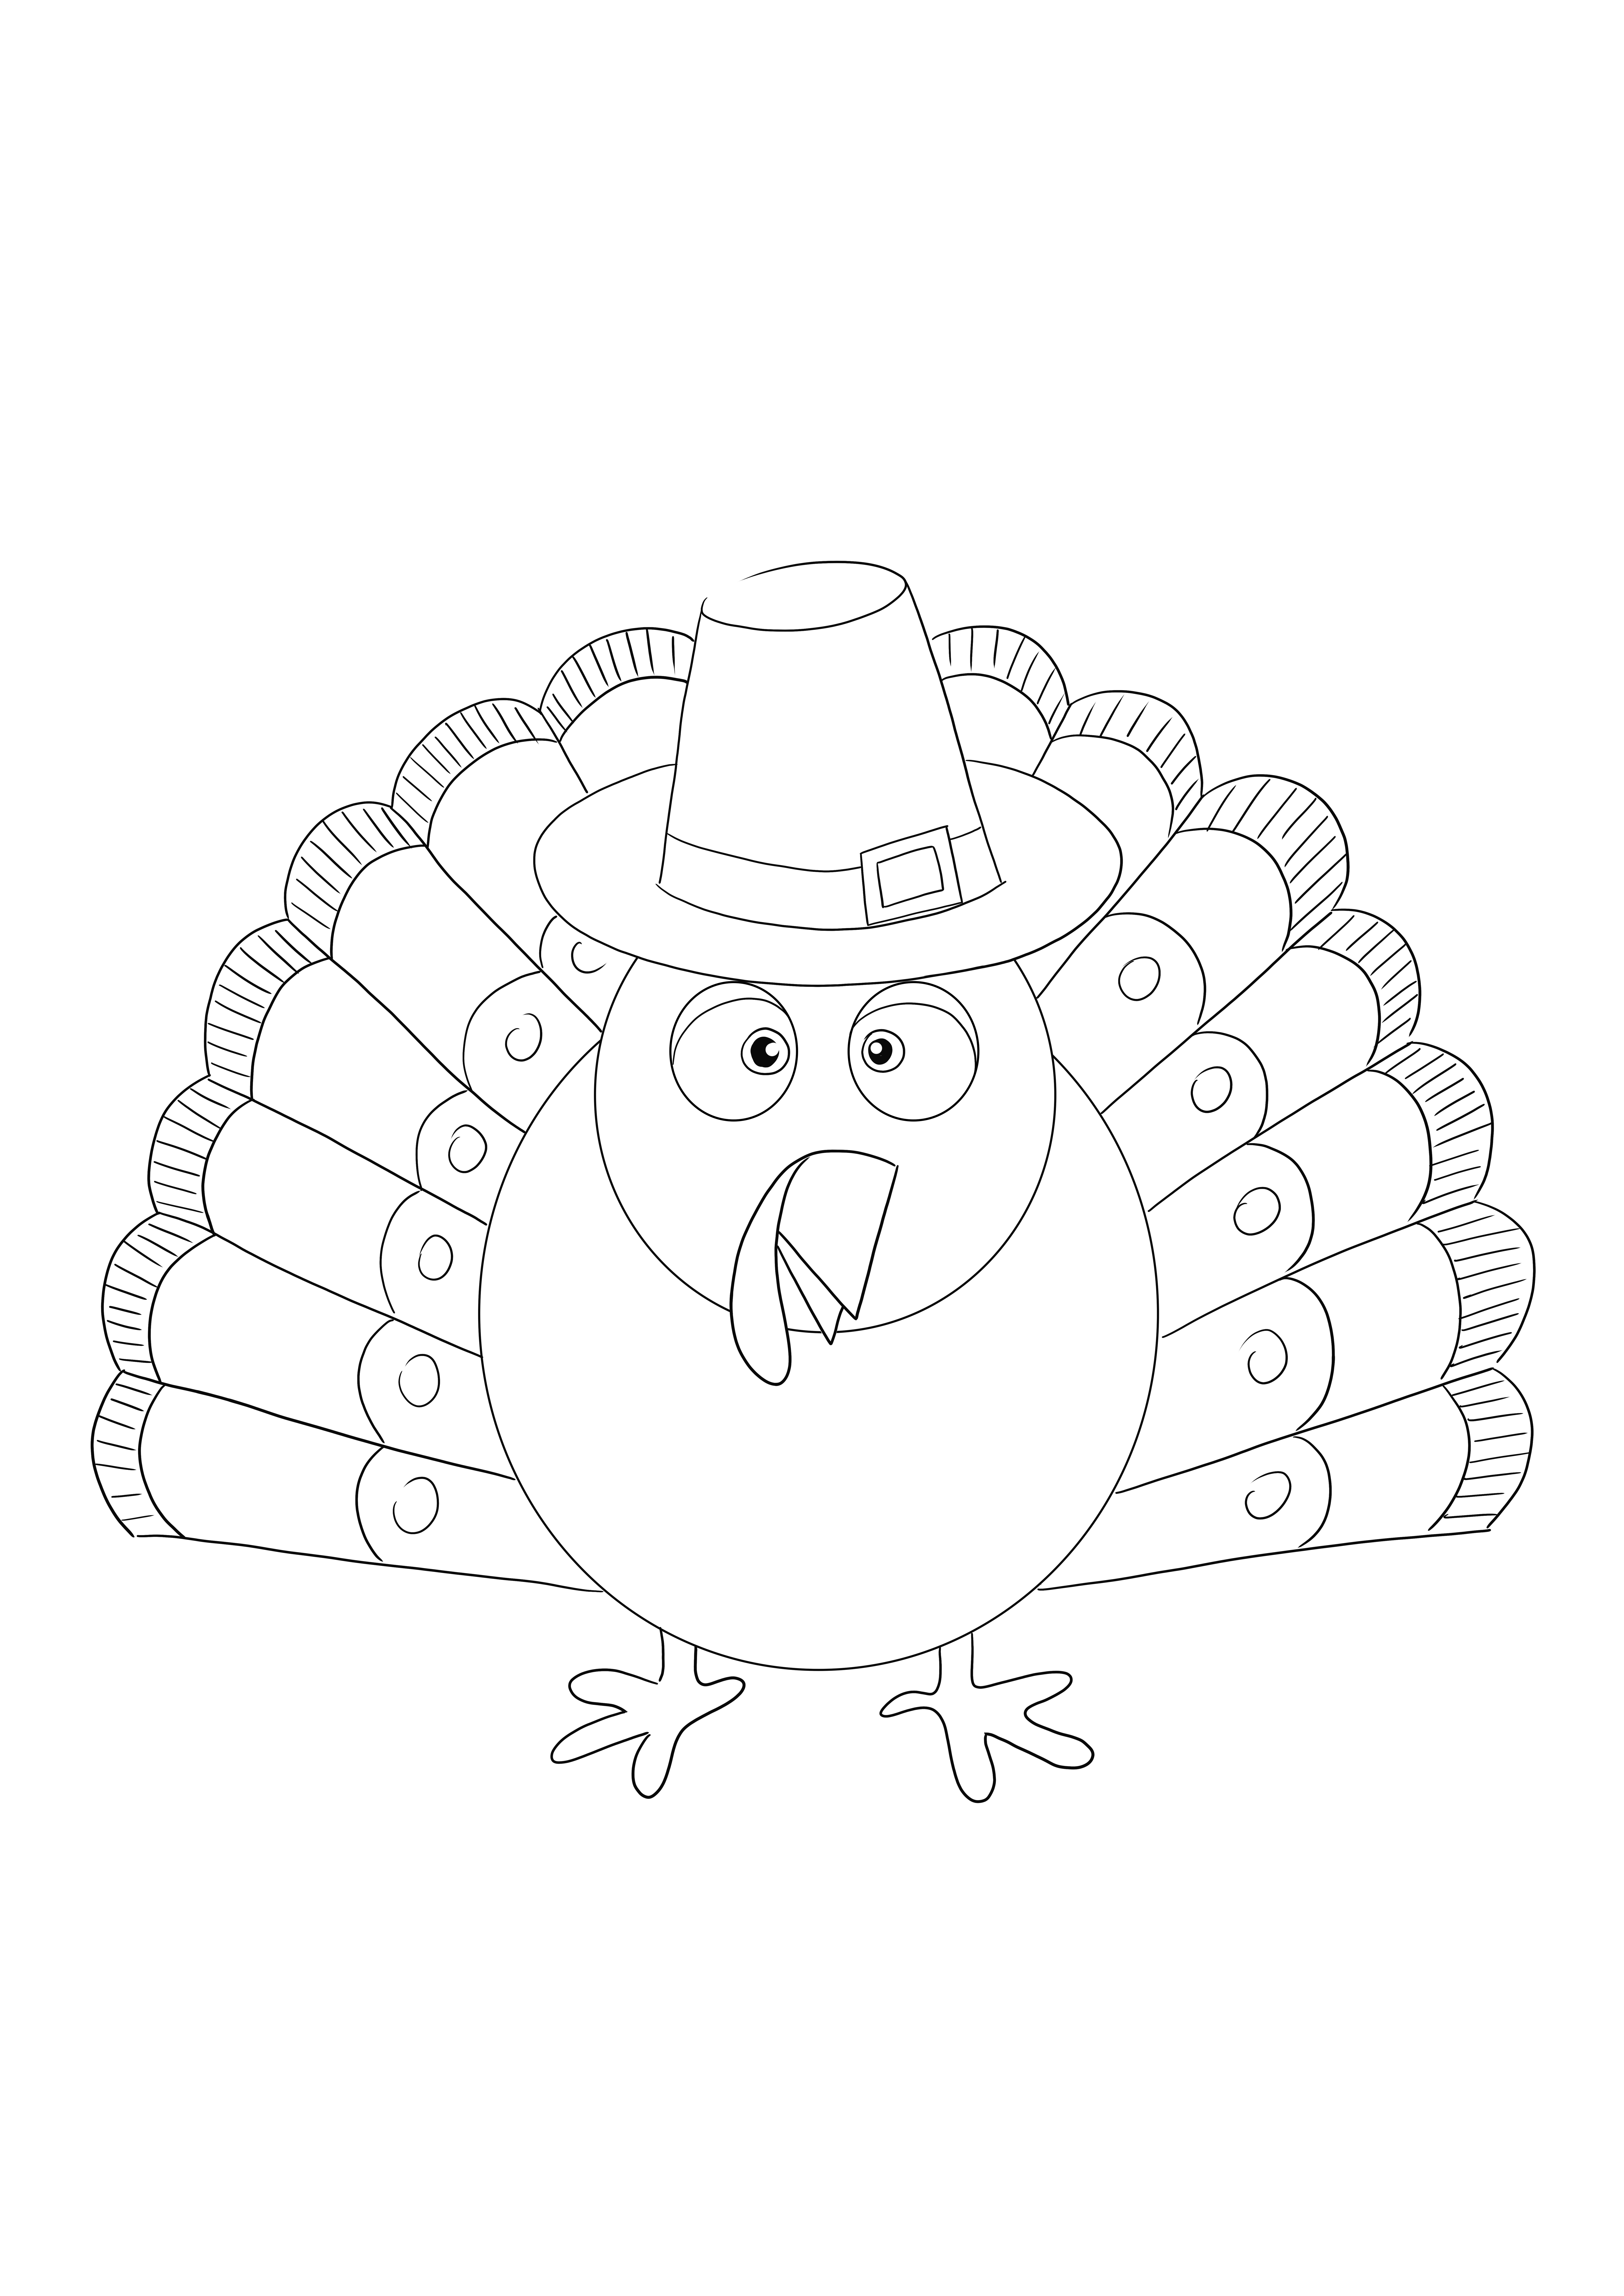 The Thanksgiving turkey free to print or download and color